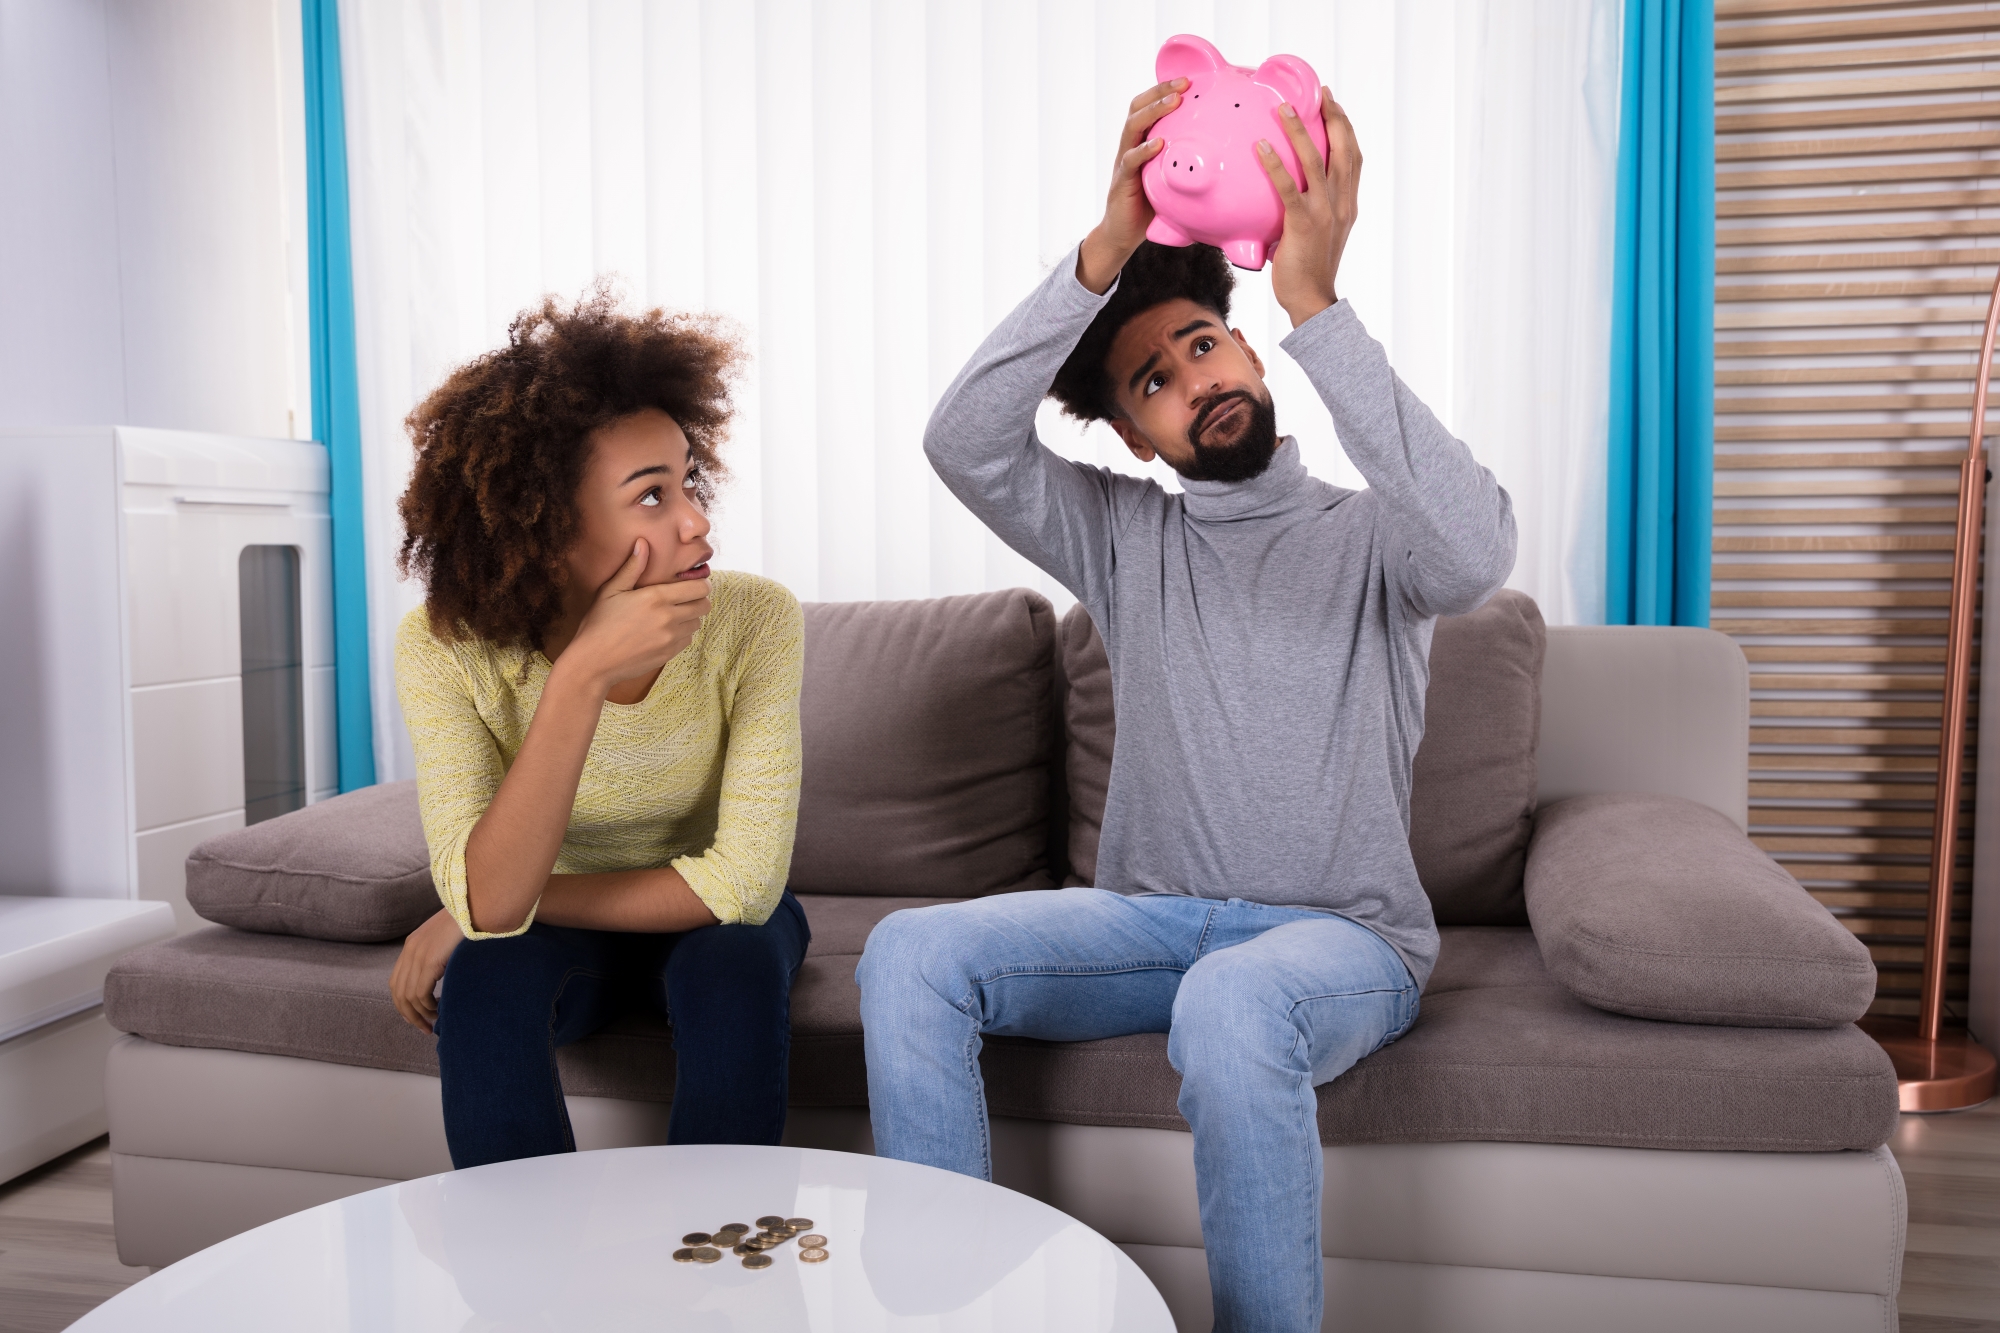 Couple looking at piggy bank distressed